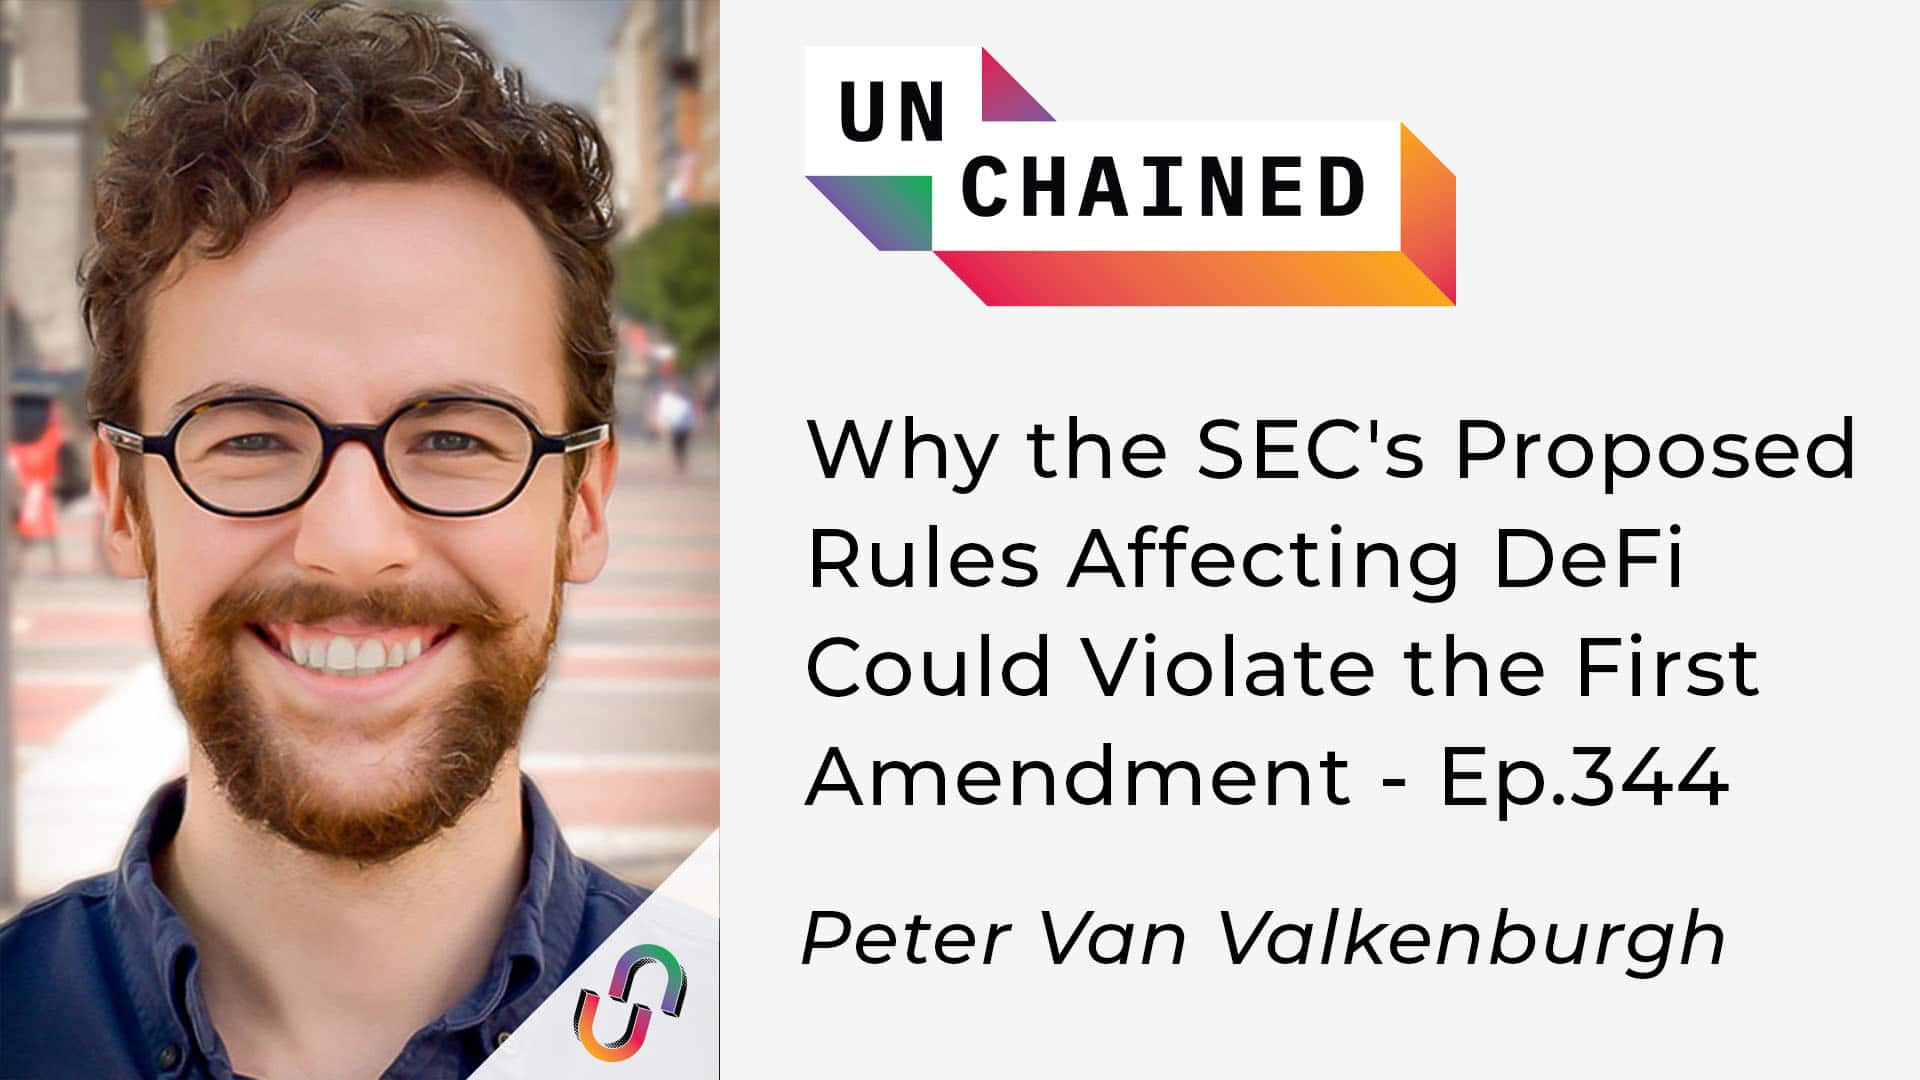 Unchained - Ep.344 - Why the SEC's Proposed Rules Affecting DeFi Could Violate the First Amendment